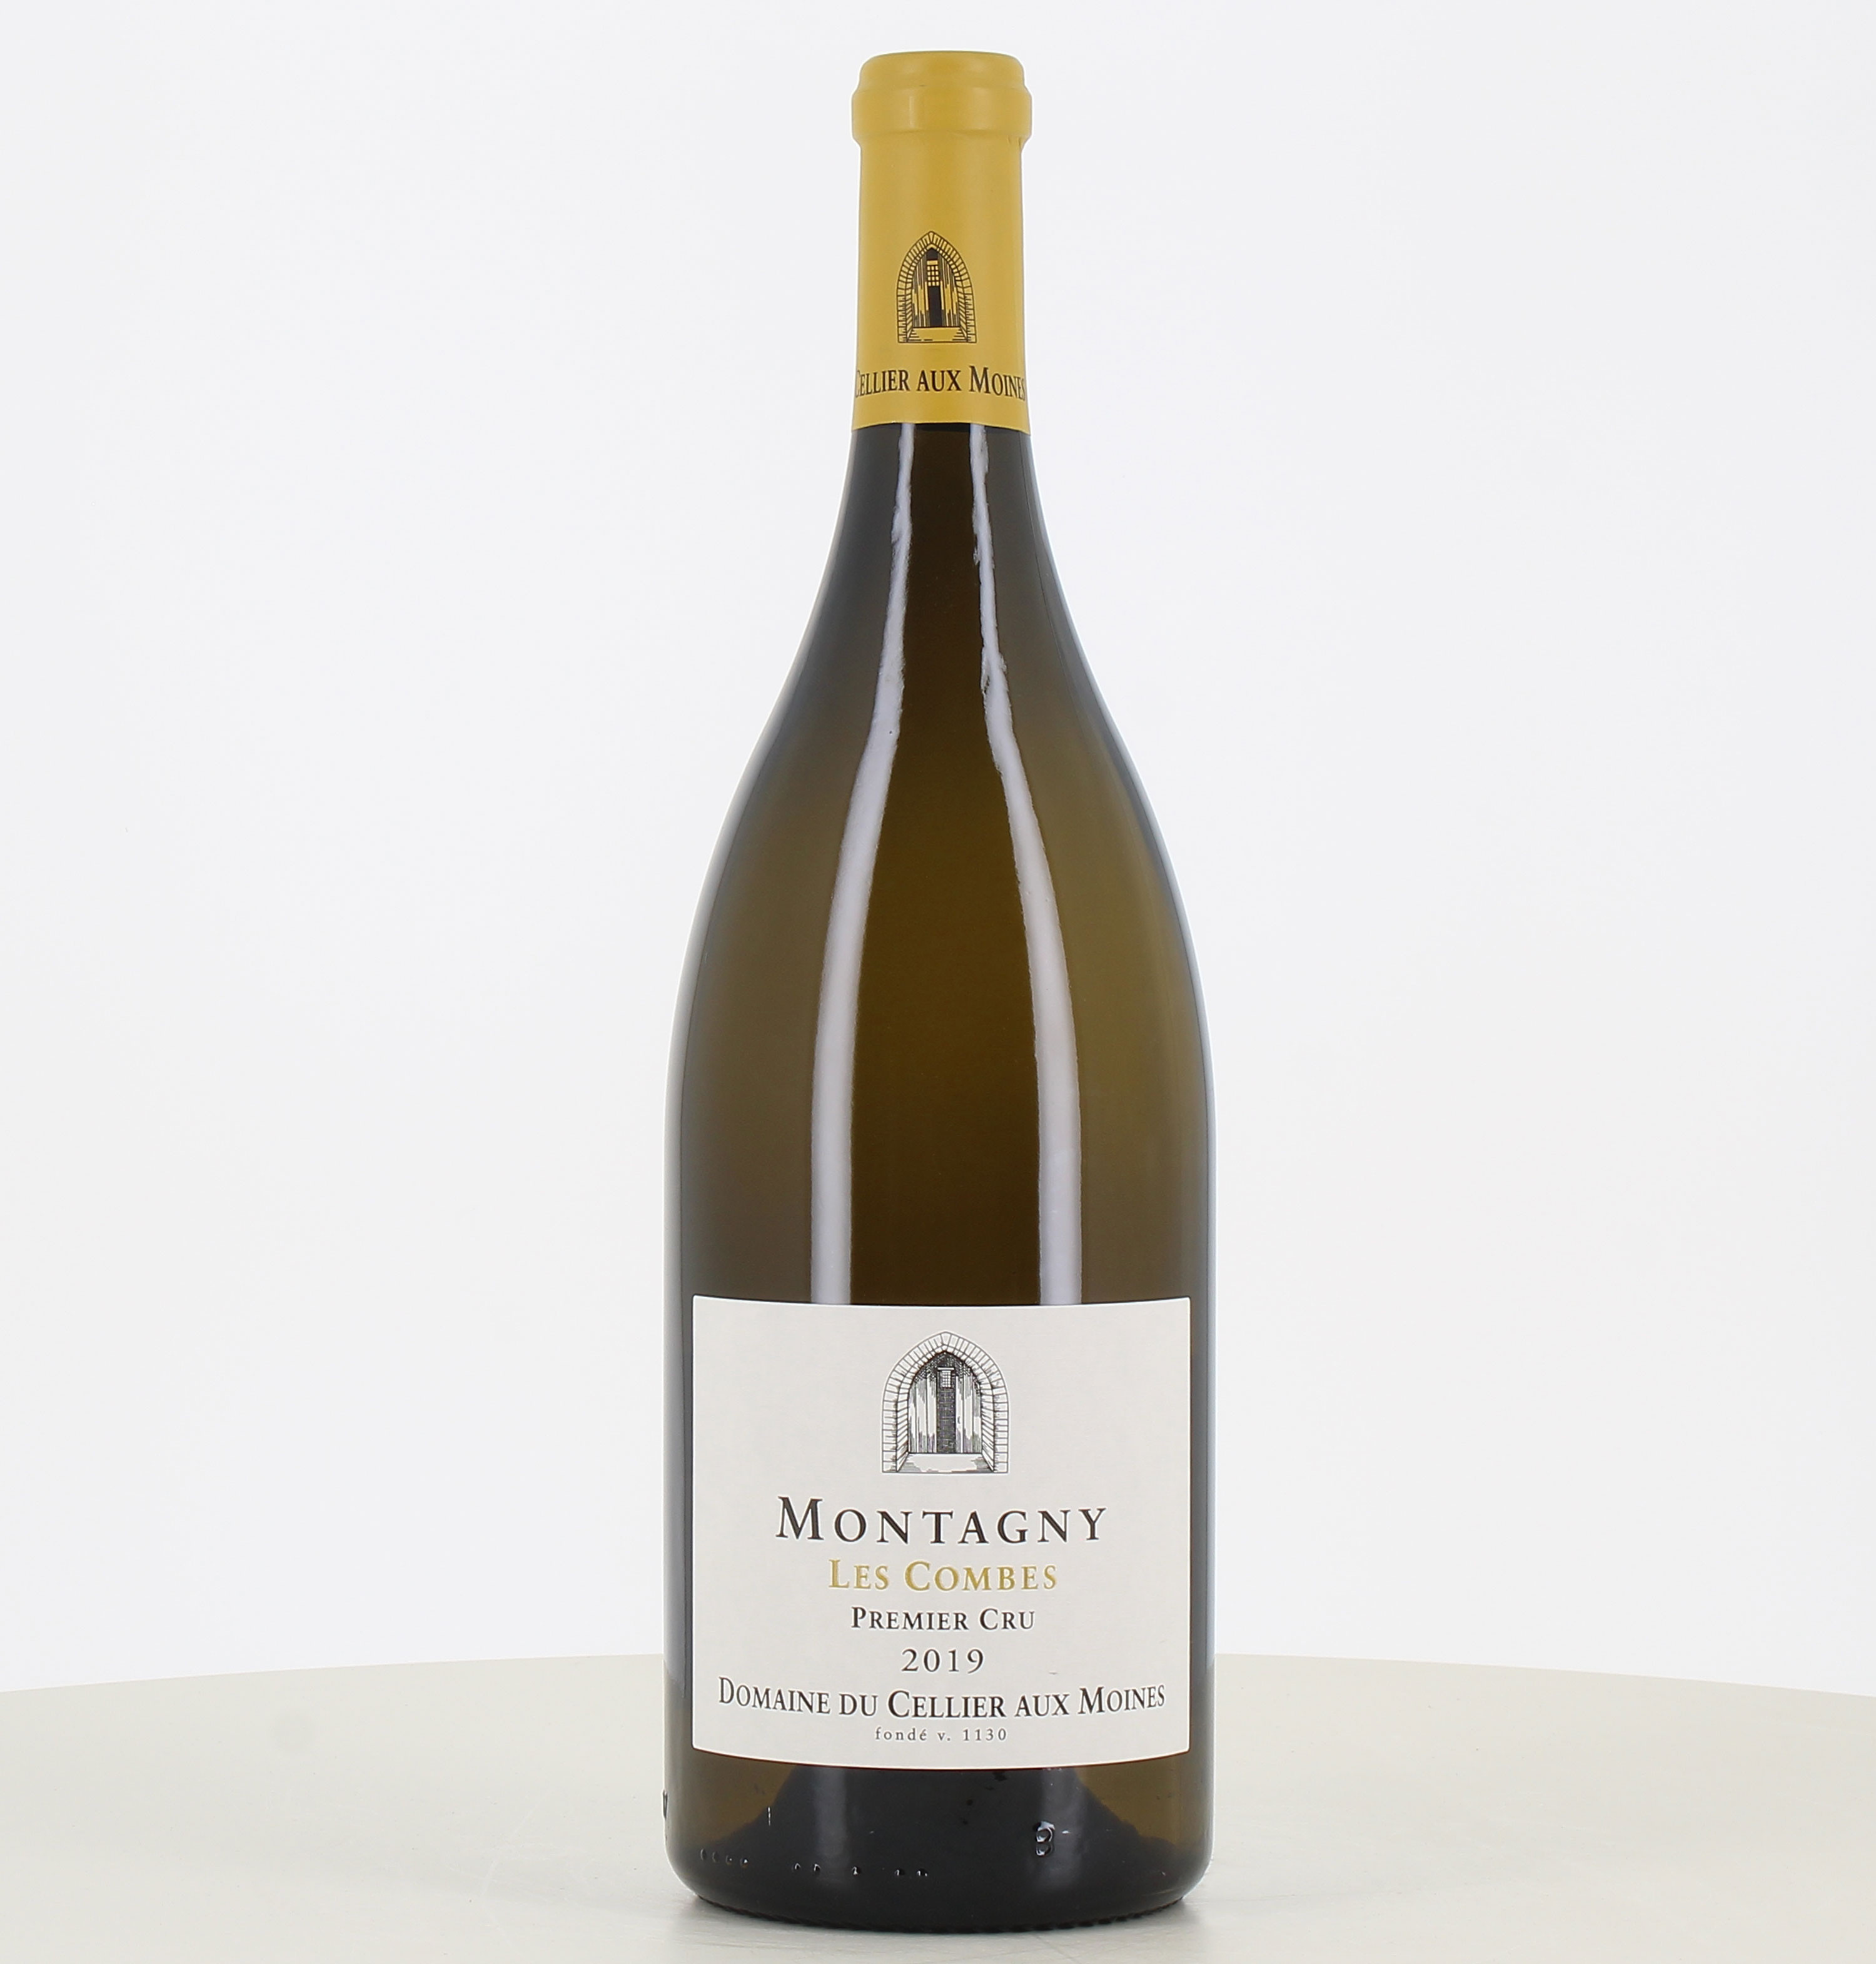 Magnum of white wine Montagny 1er Cru Les Combes Cellier aux Moines 2019 